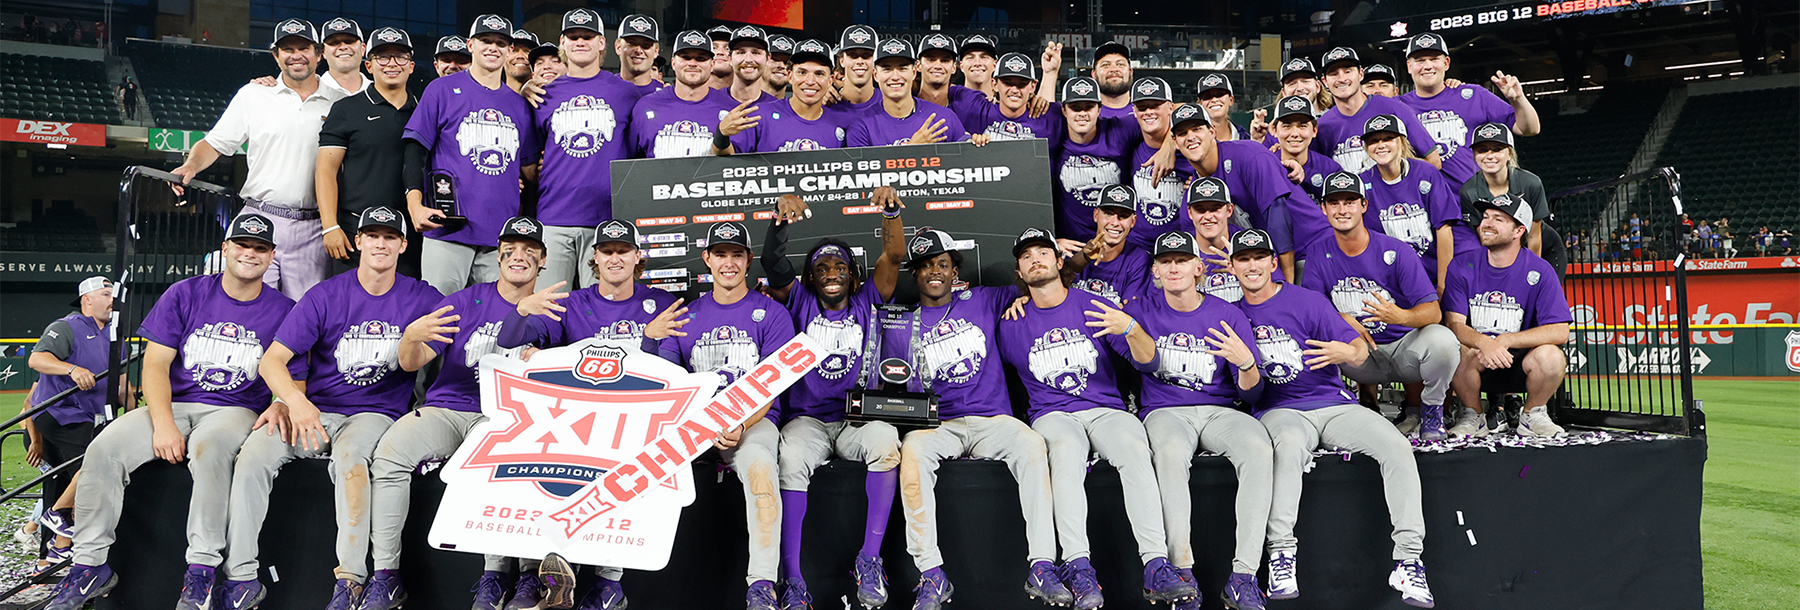 Section Image: TCU Baseball team at the College World Series 